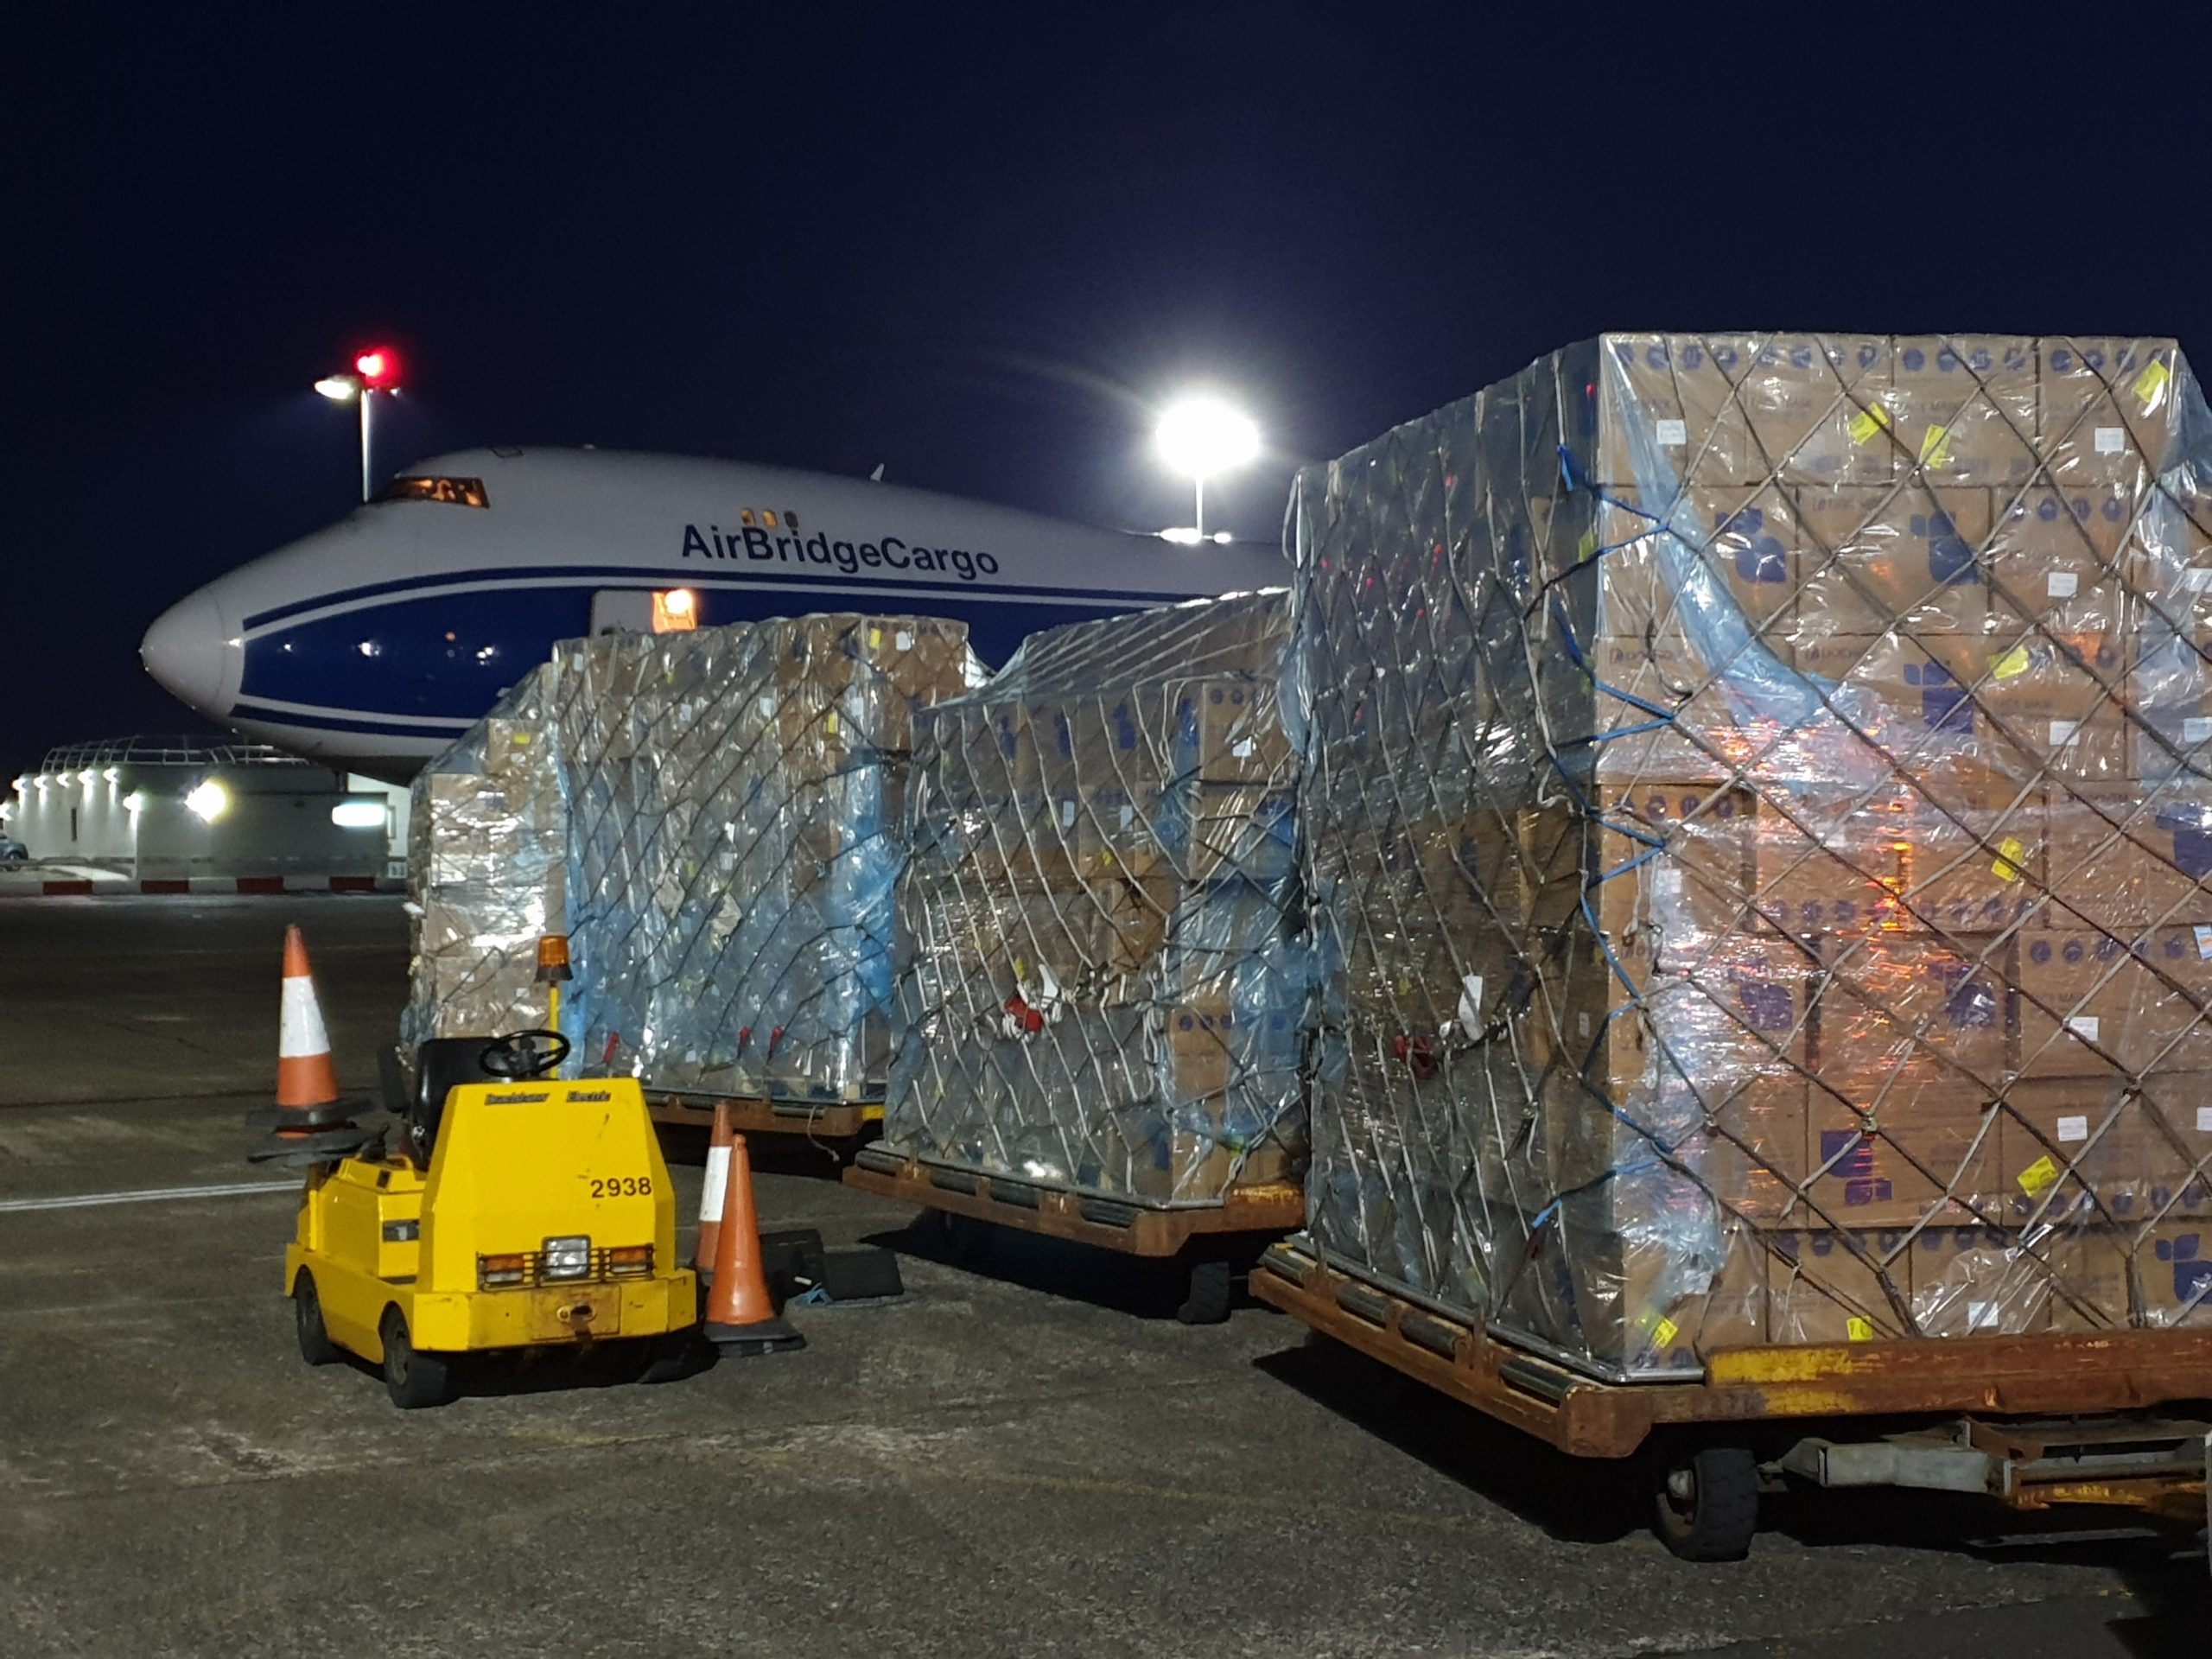 The precious cargo of face masks and other vital equipment to help hospitals across Scotland fight the Covid-19 pandemic is offloaded on to      the tarmac at Prestwick Airport yesterday. The supplies will be delivered to hospitals and care homes over the next few days